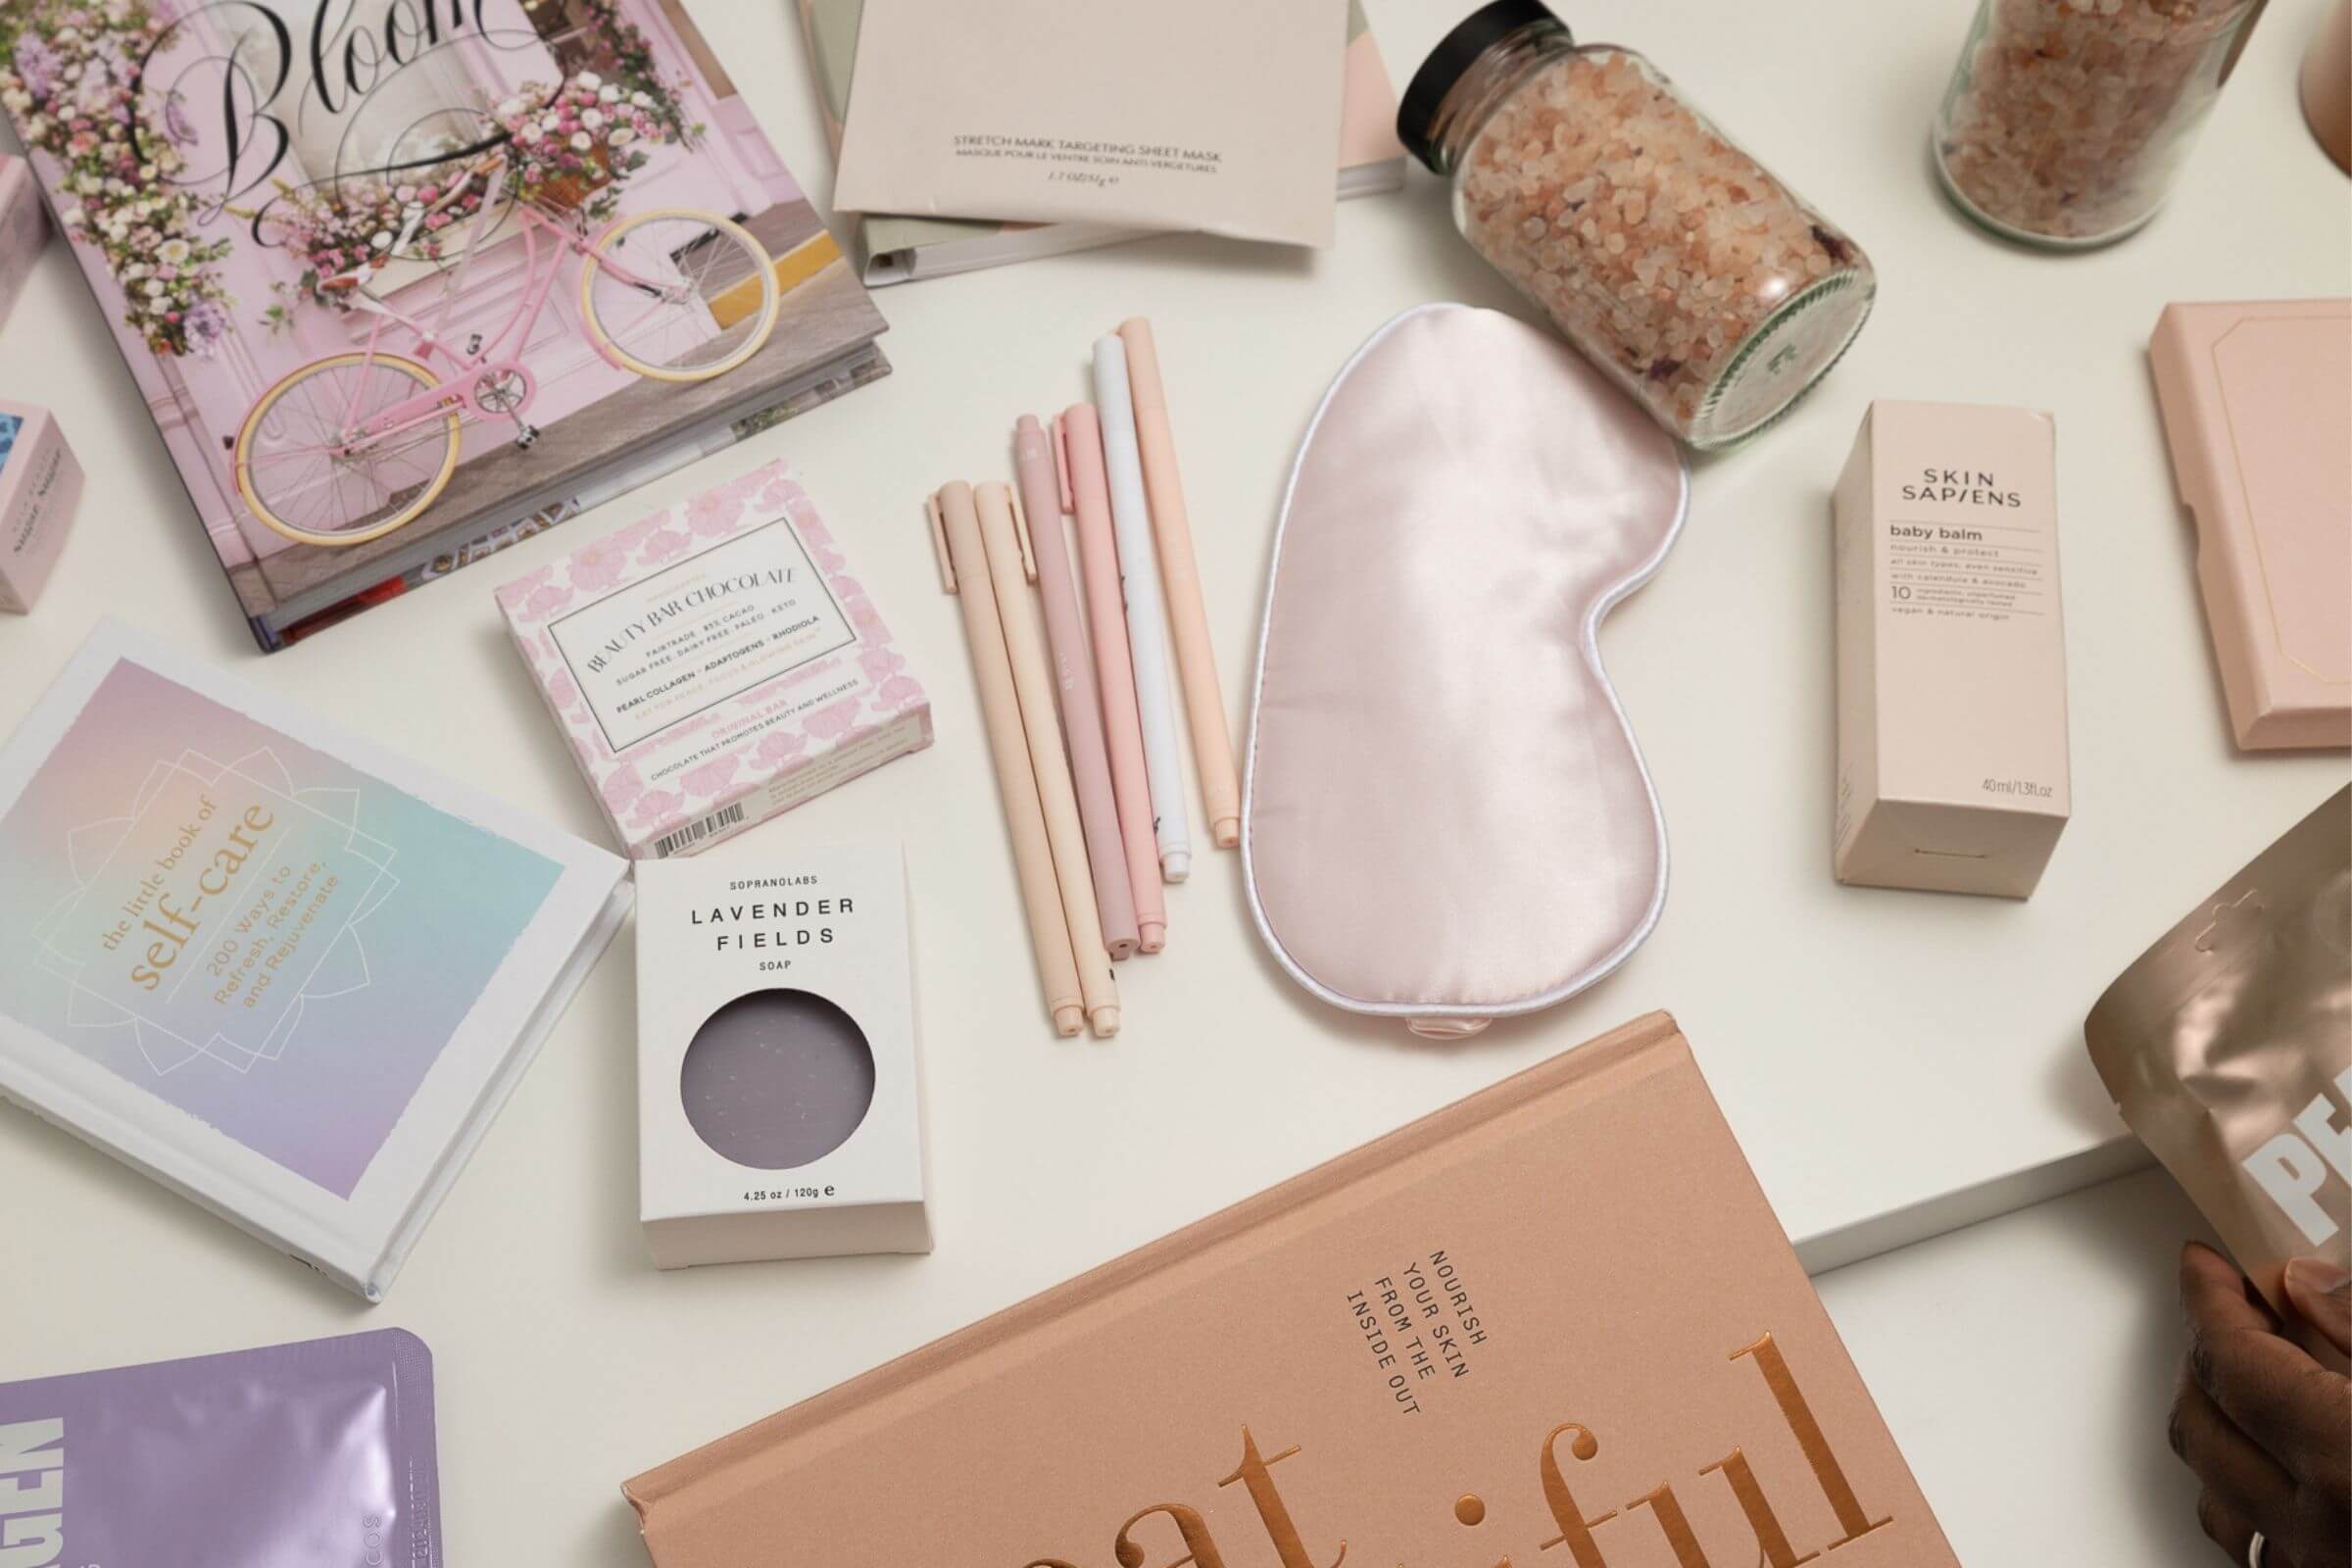 How To Build A Self Care Kit - From You, To You